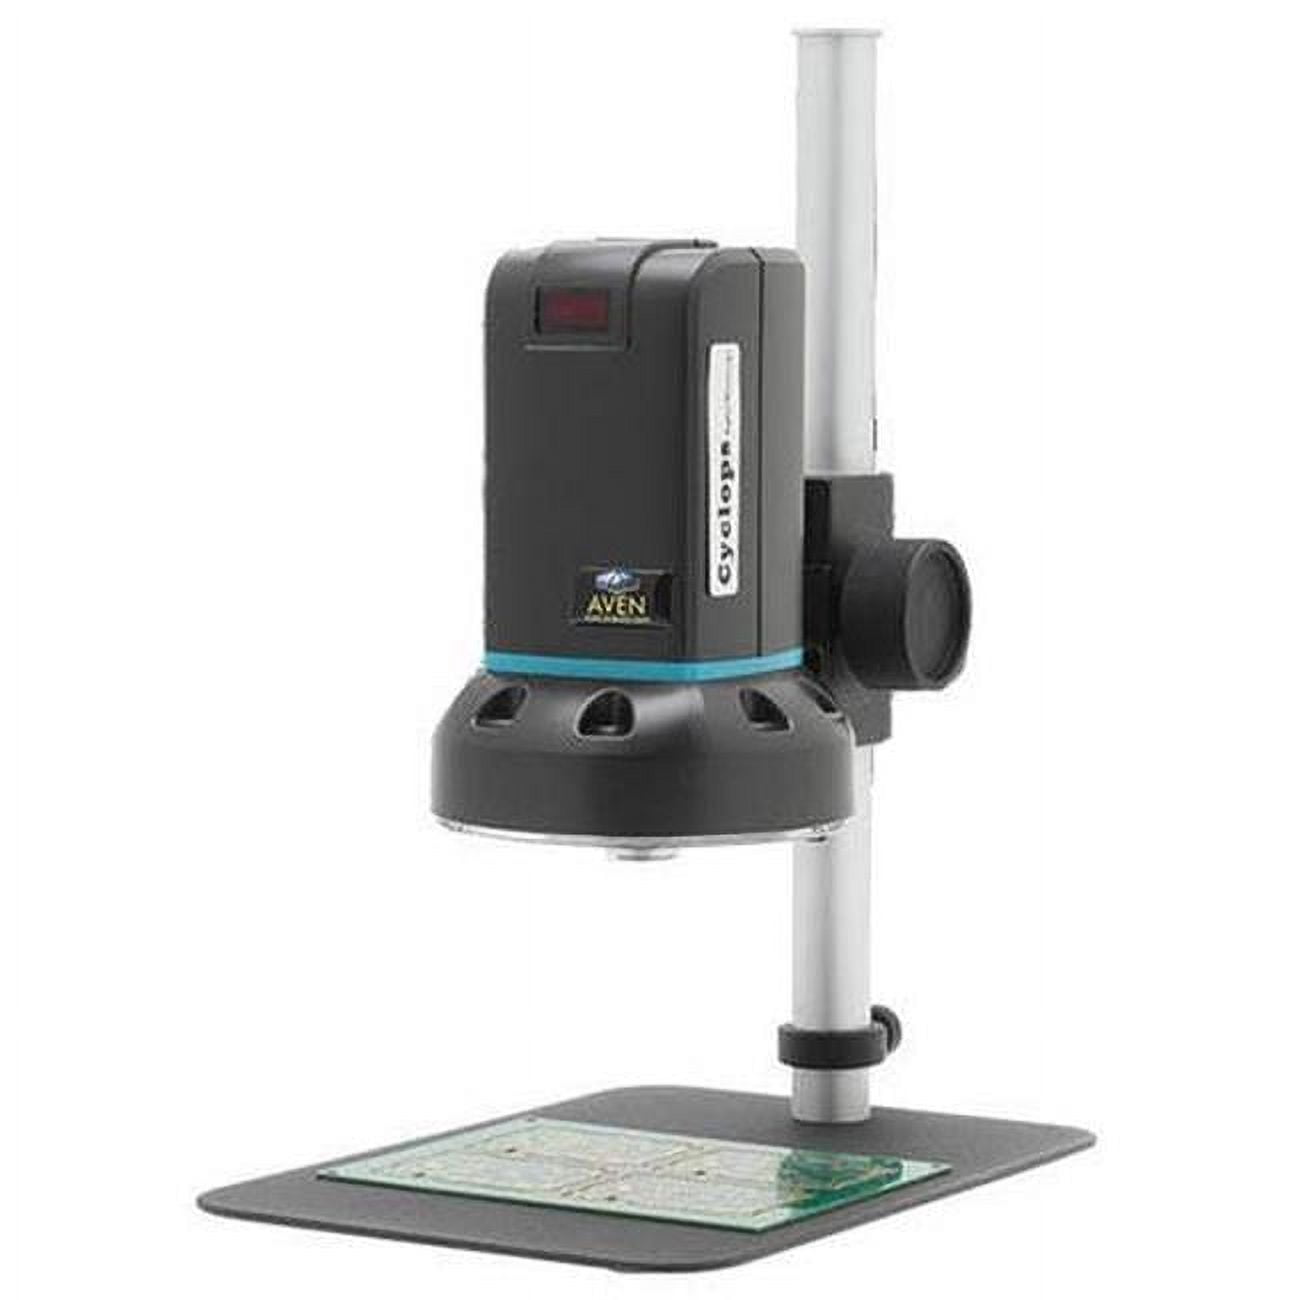 Picture of Aven 26700-423 Digital Microscope Cyclops 3.0 HDMI Plus USB with 4x Lens